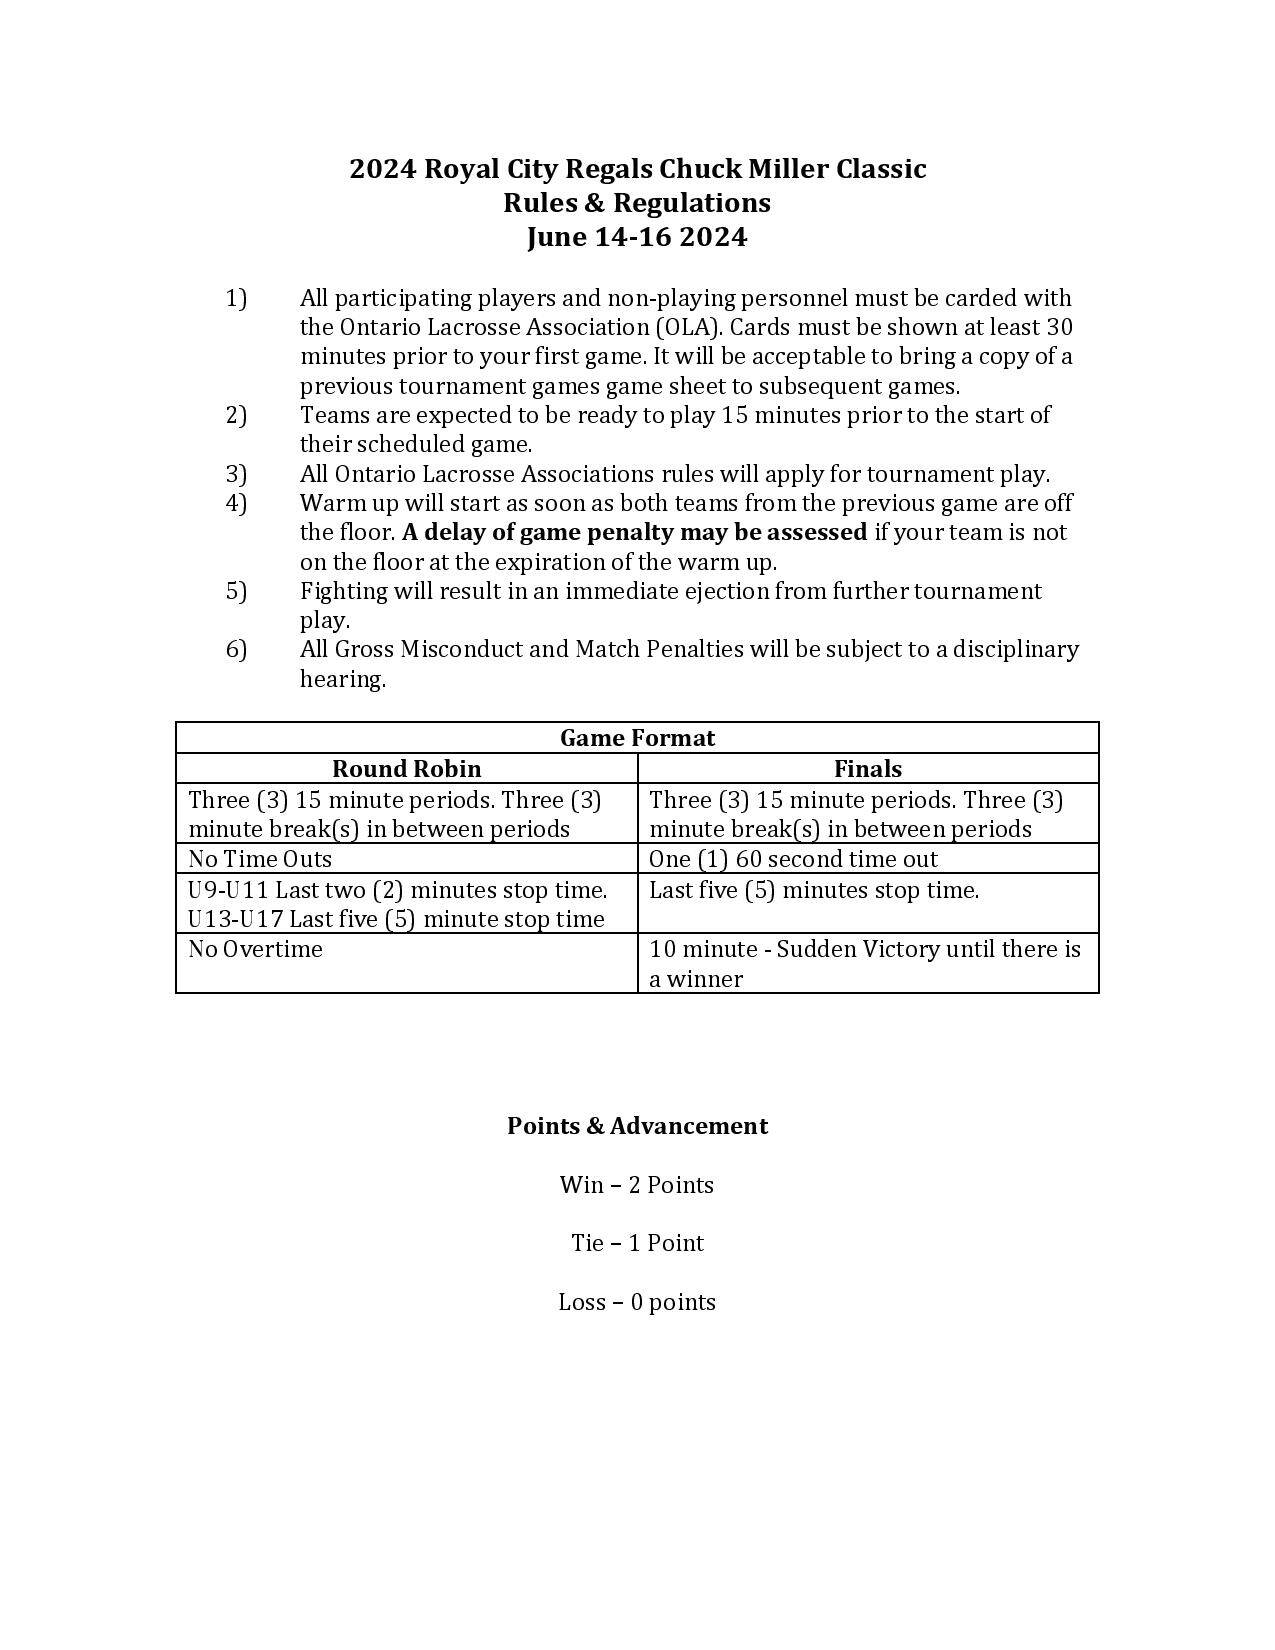 2024_Chuck_Miller_Rules_and_Regulations-page-001.jpg